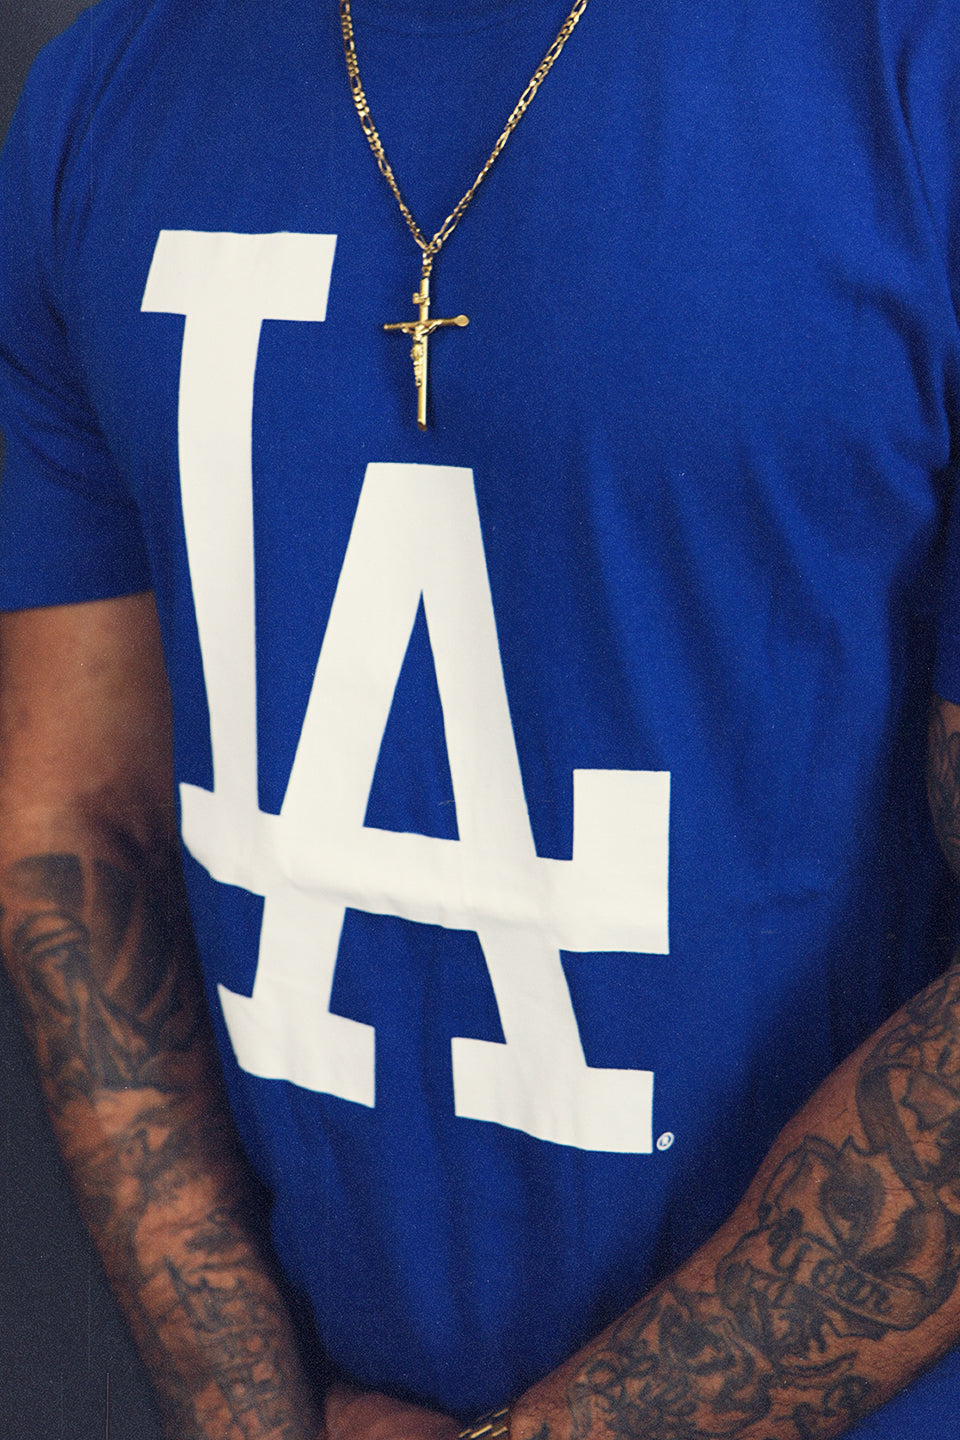 Los Angeles Dodgers "City Transit" 59Fifty Fitted Matching Royal T-Shirt